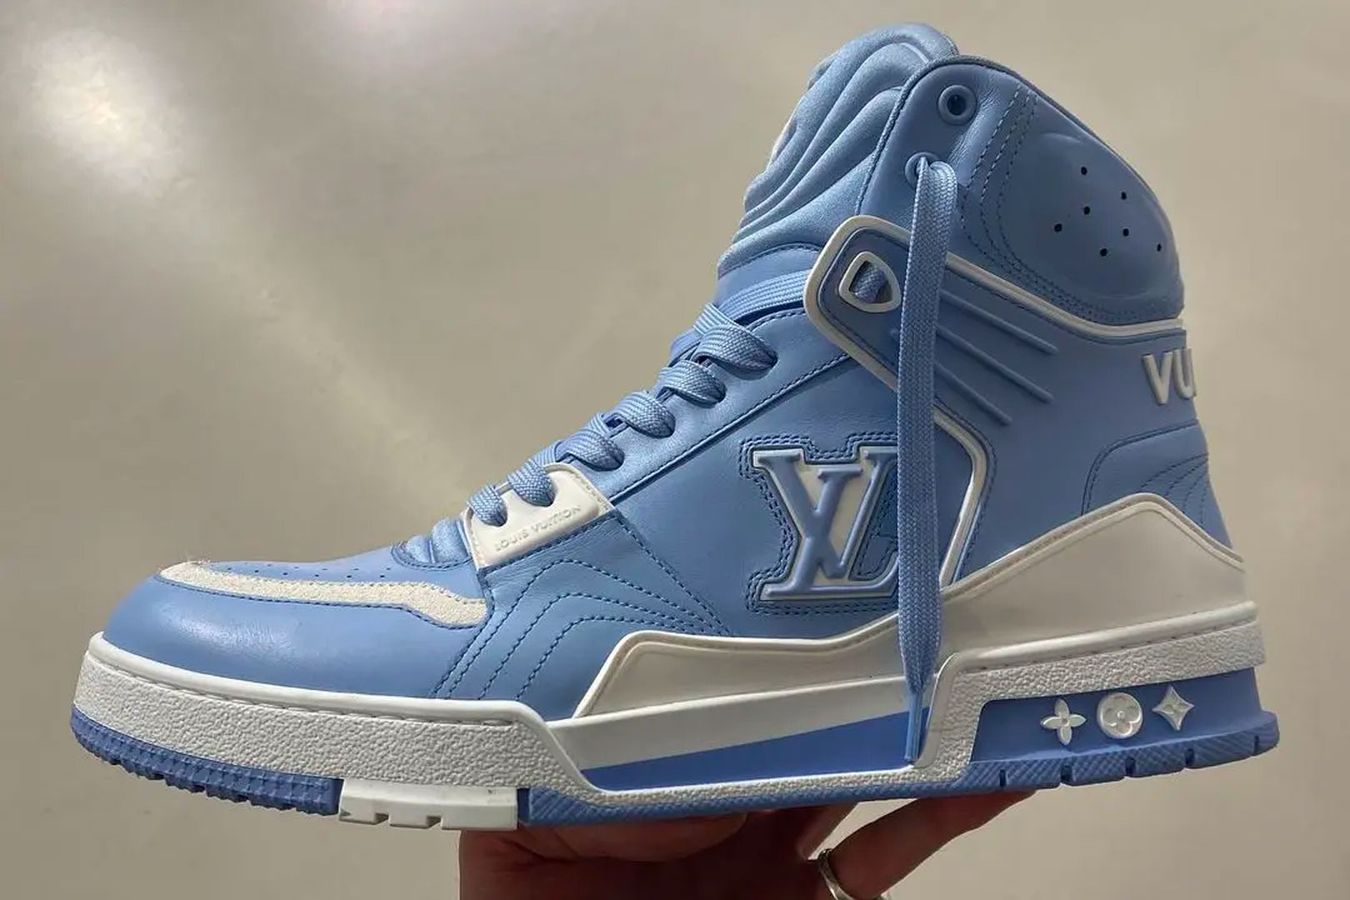 Louis Vuitton High 8 product image of a blue and white high-top.